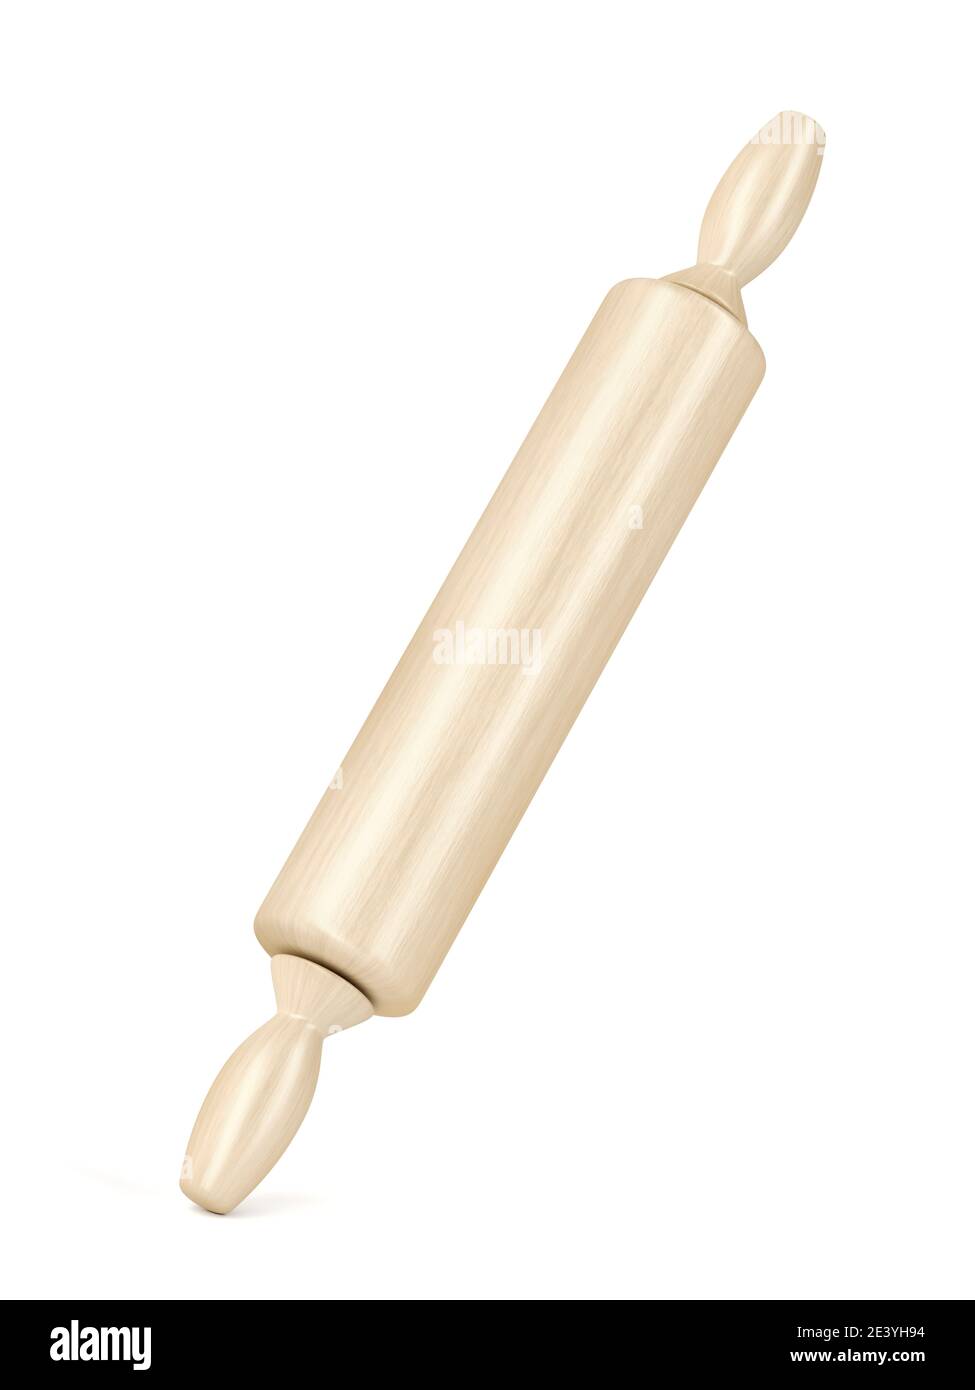 Wooden roller type rolling pin on white background Stock Photo